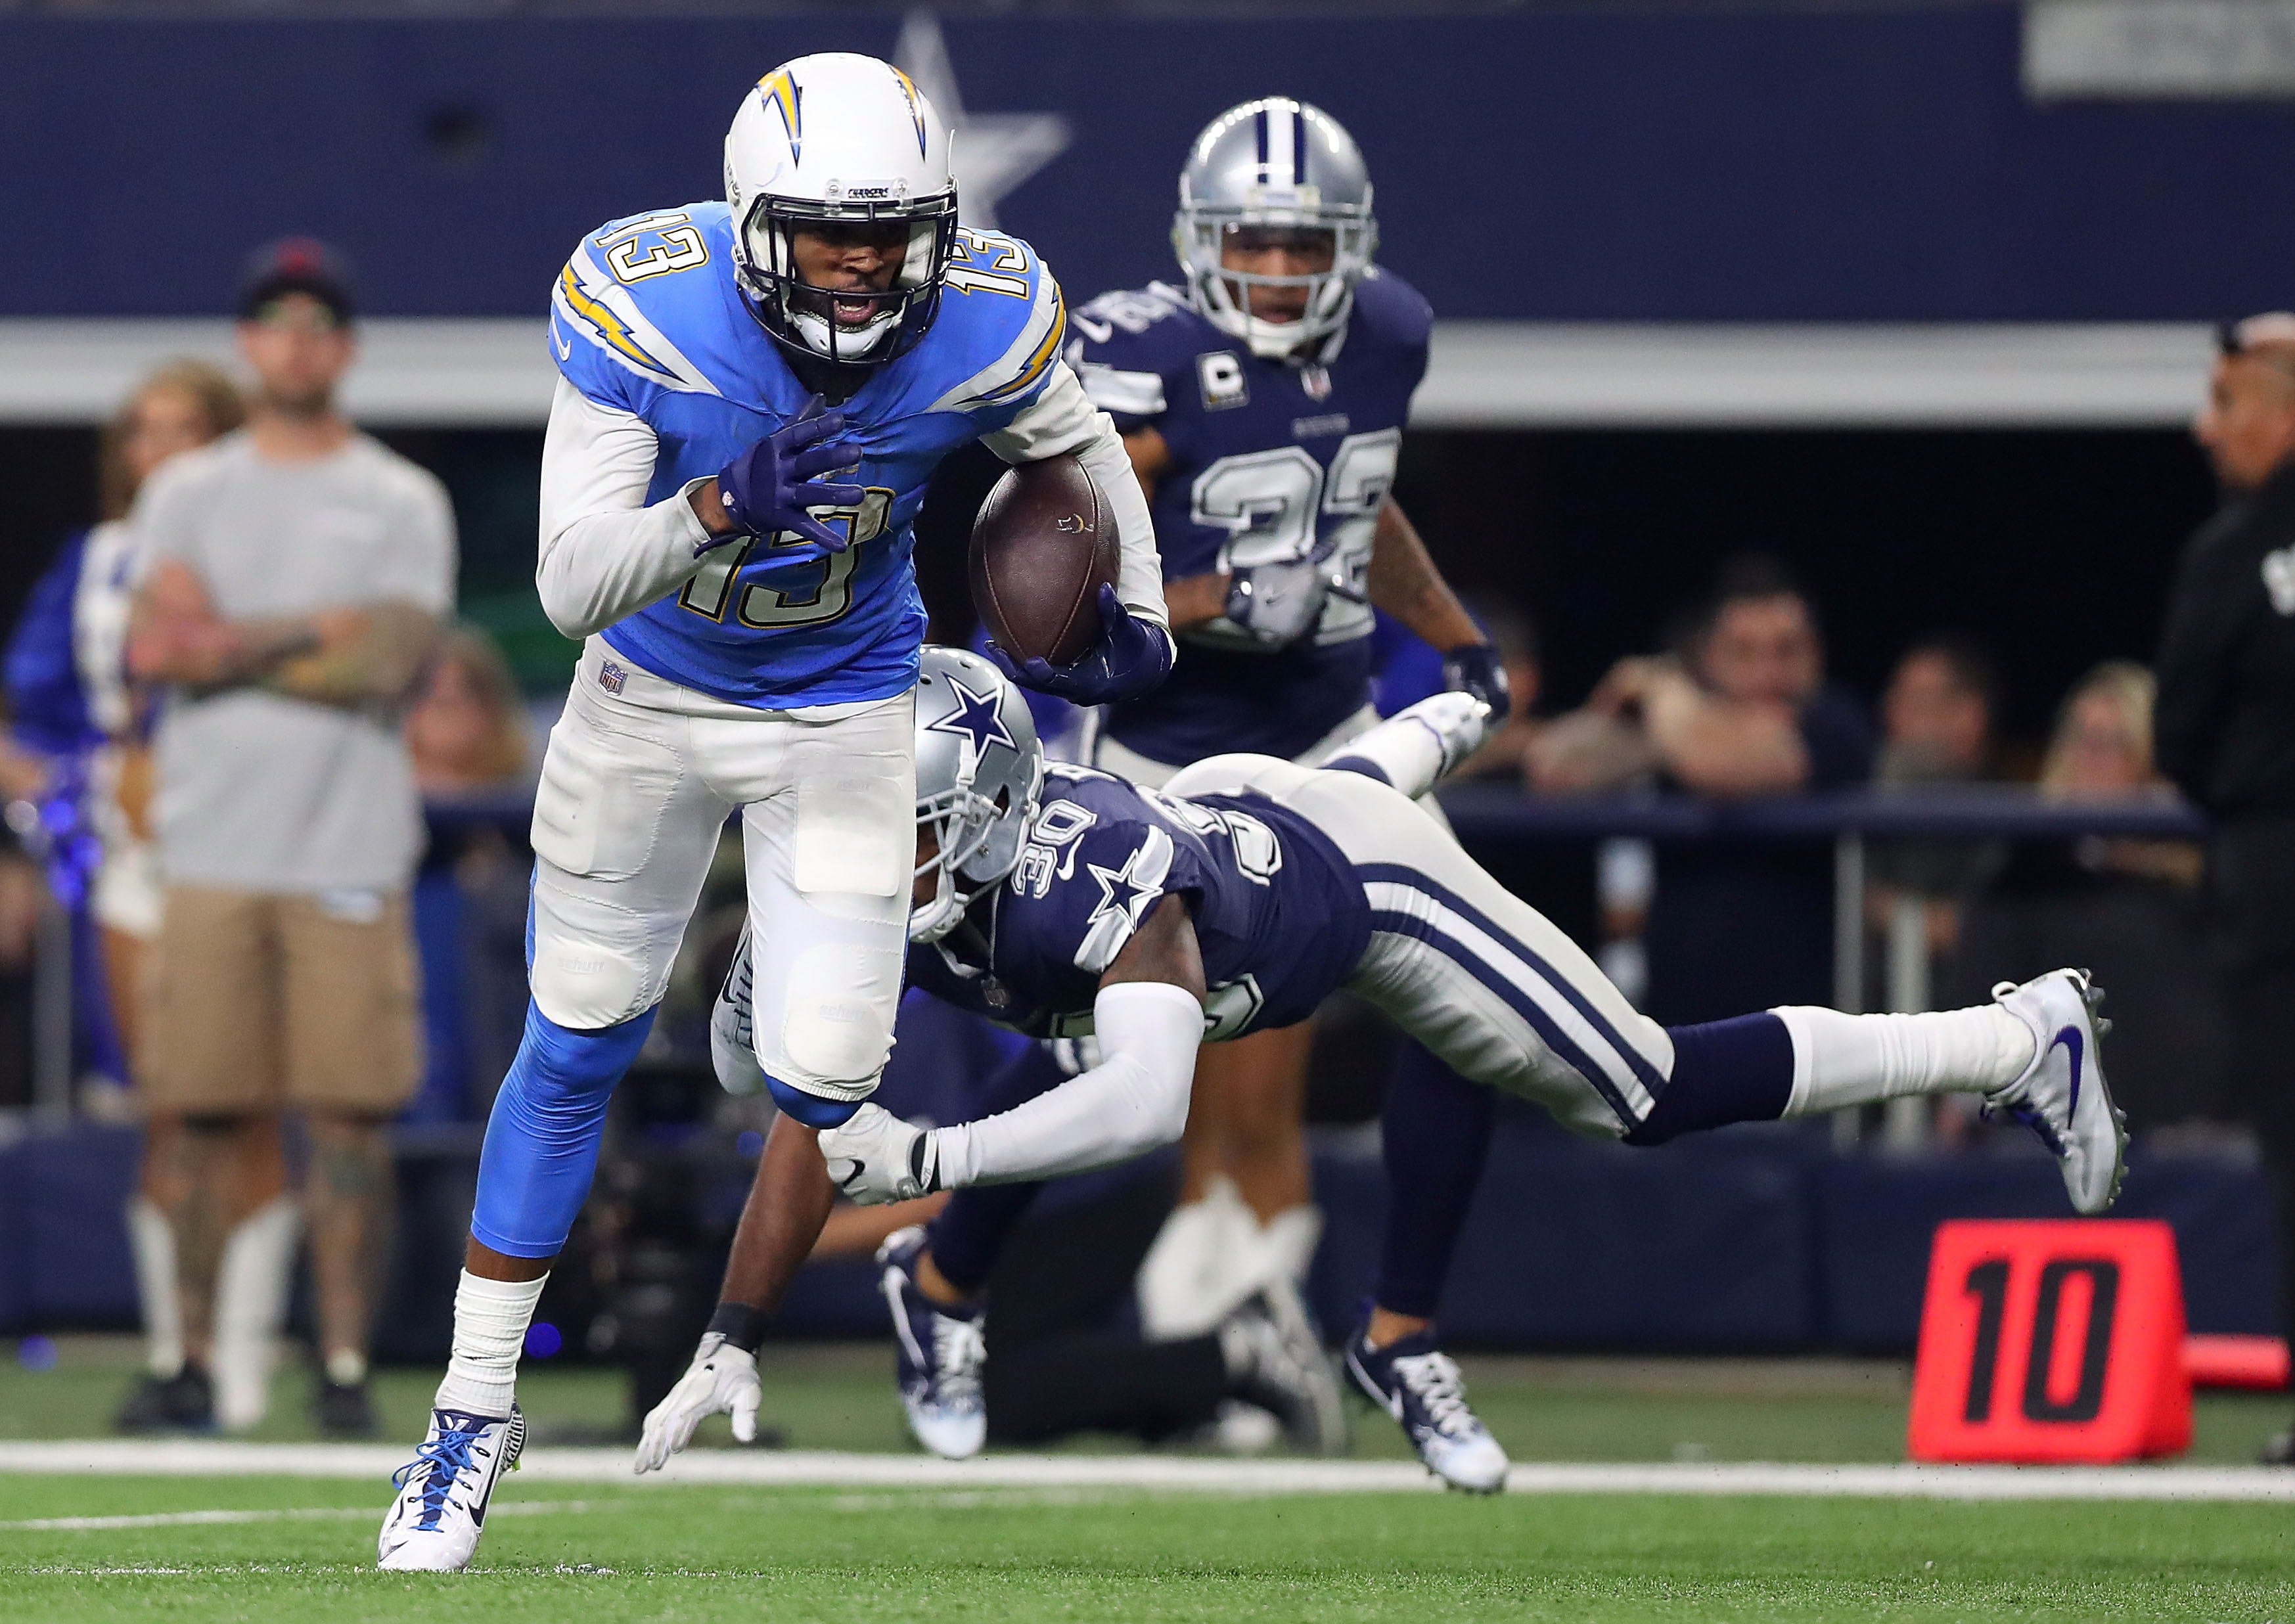 Chargers wide receiver in action against the Cowboys